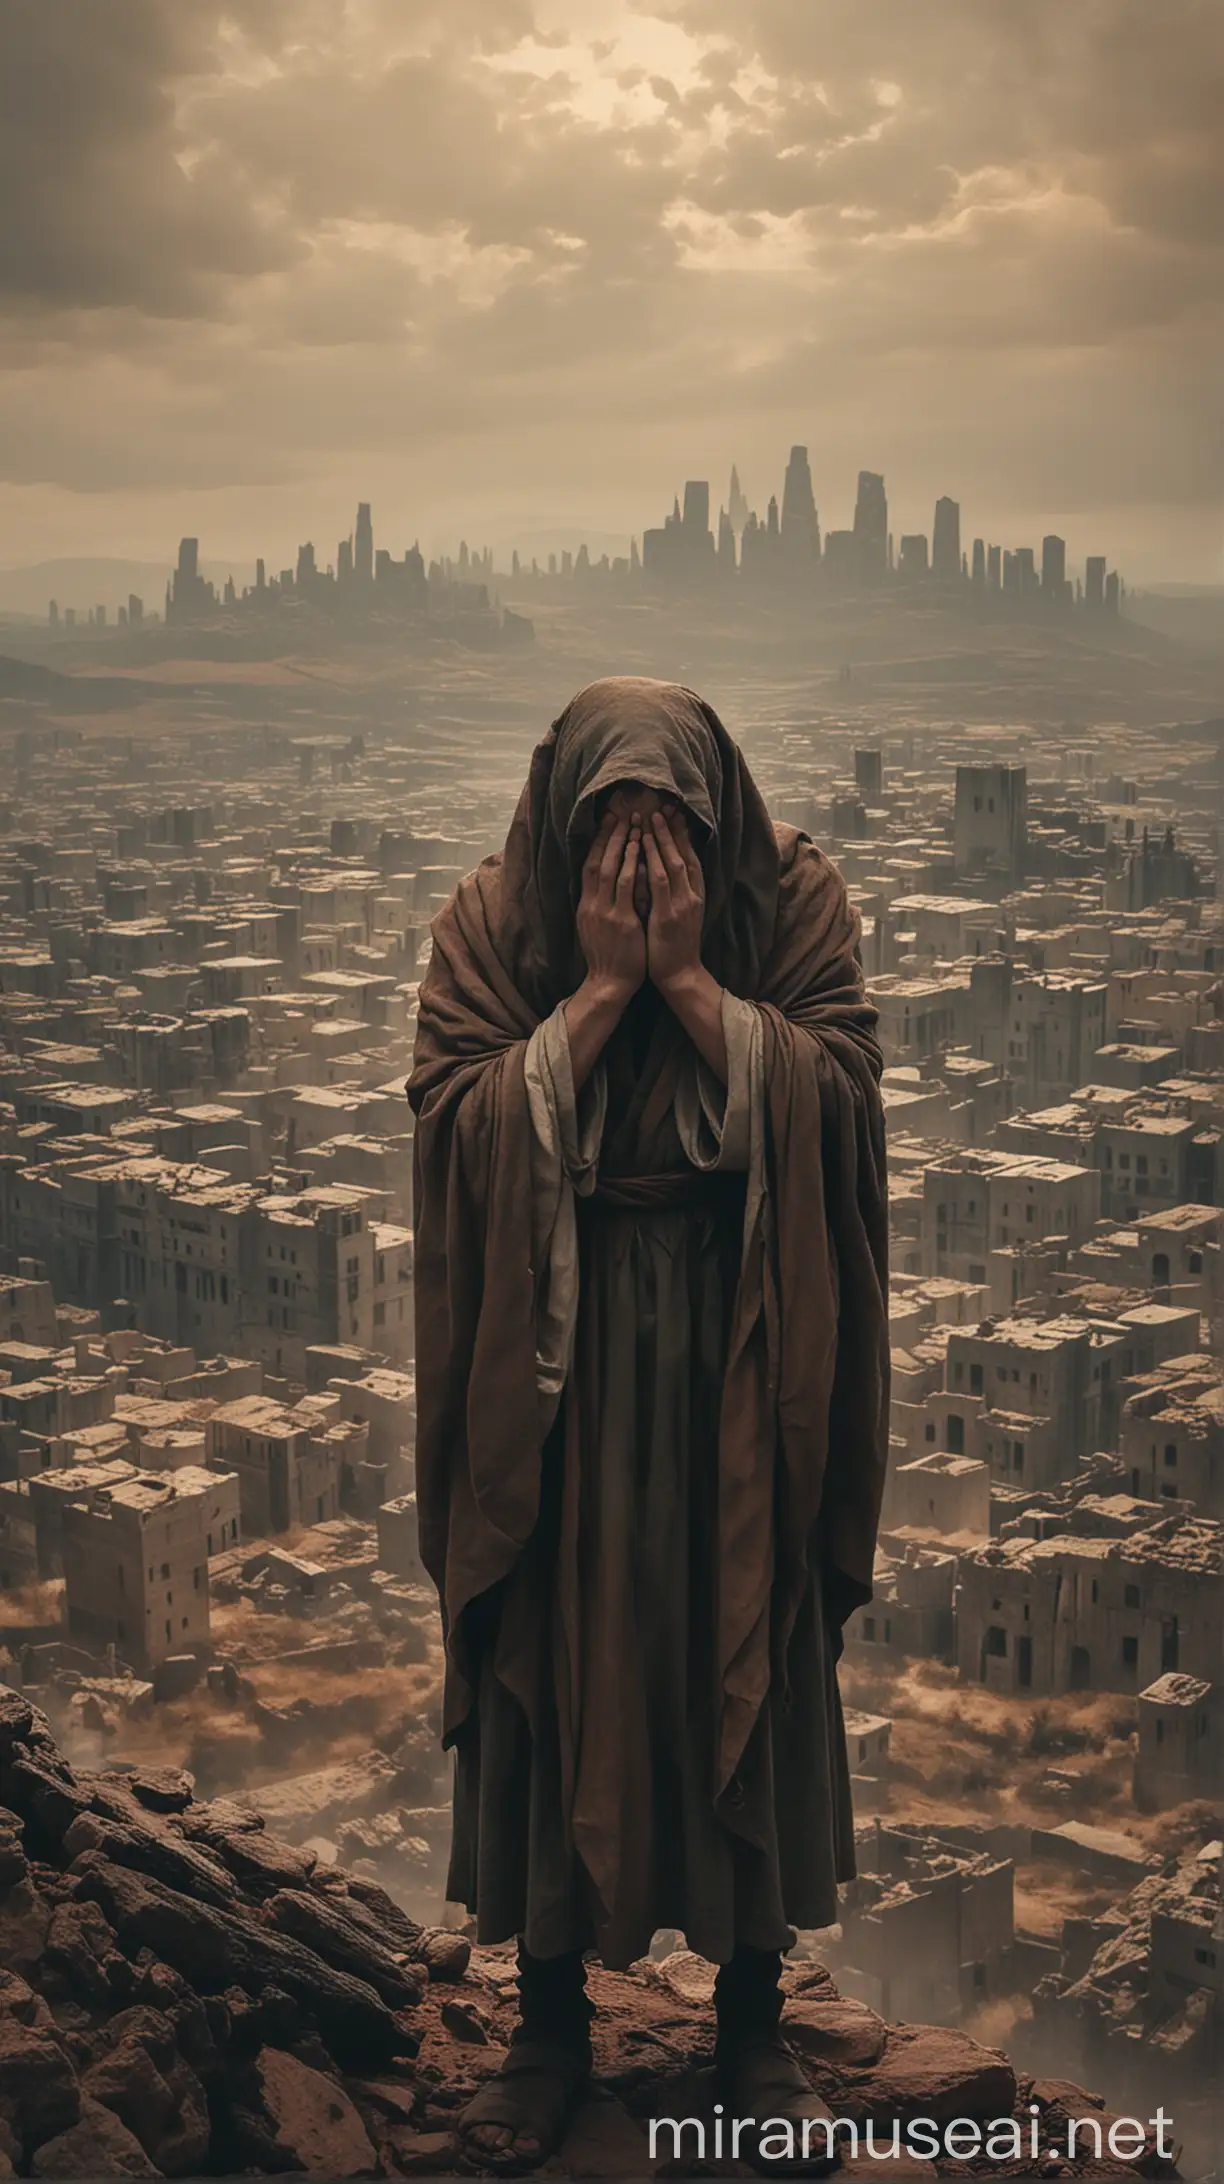 An image of Canaan, the son of Ham, standing with his head bowed and hands covering his face, with a cityscape or landscape in the background representing the cursed land of Canaan. The color palette should be muted and gloomy to convey the sense of doom In ancient world 